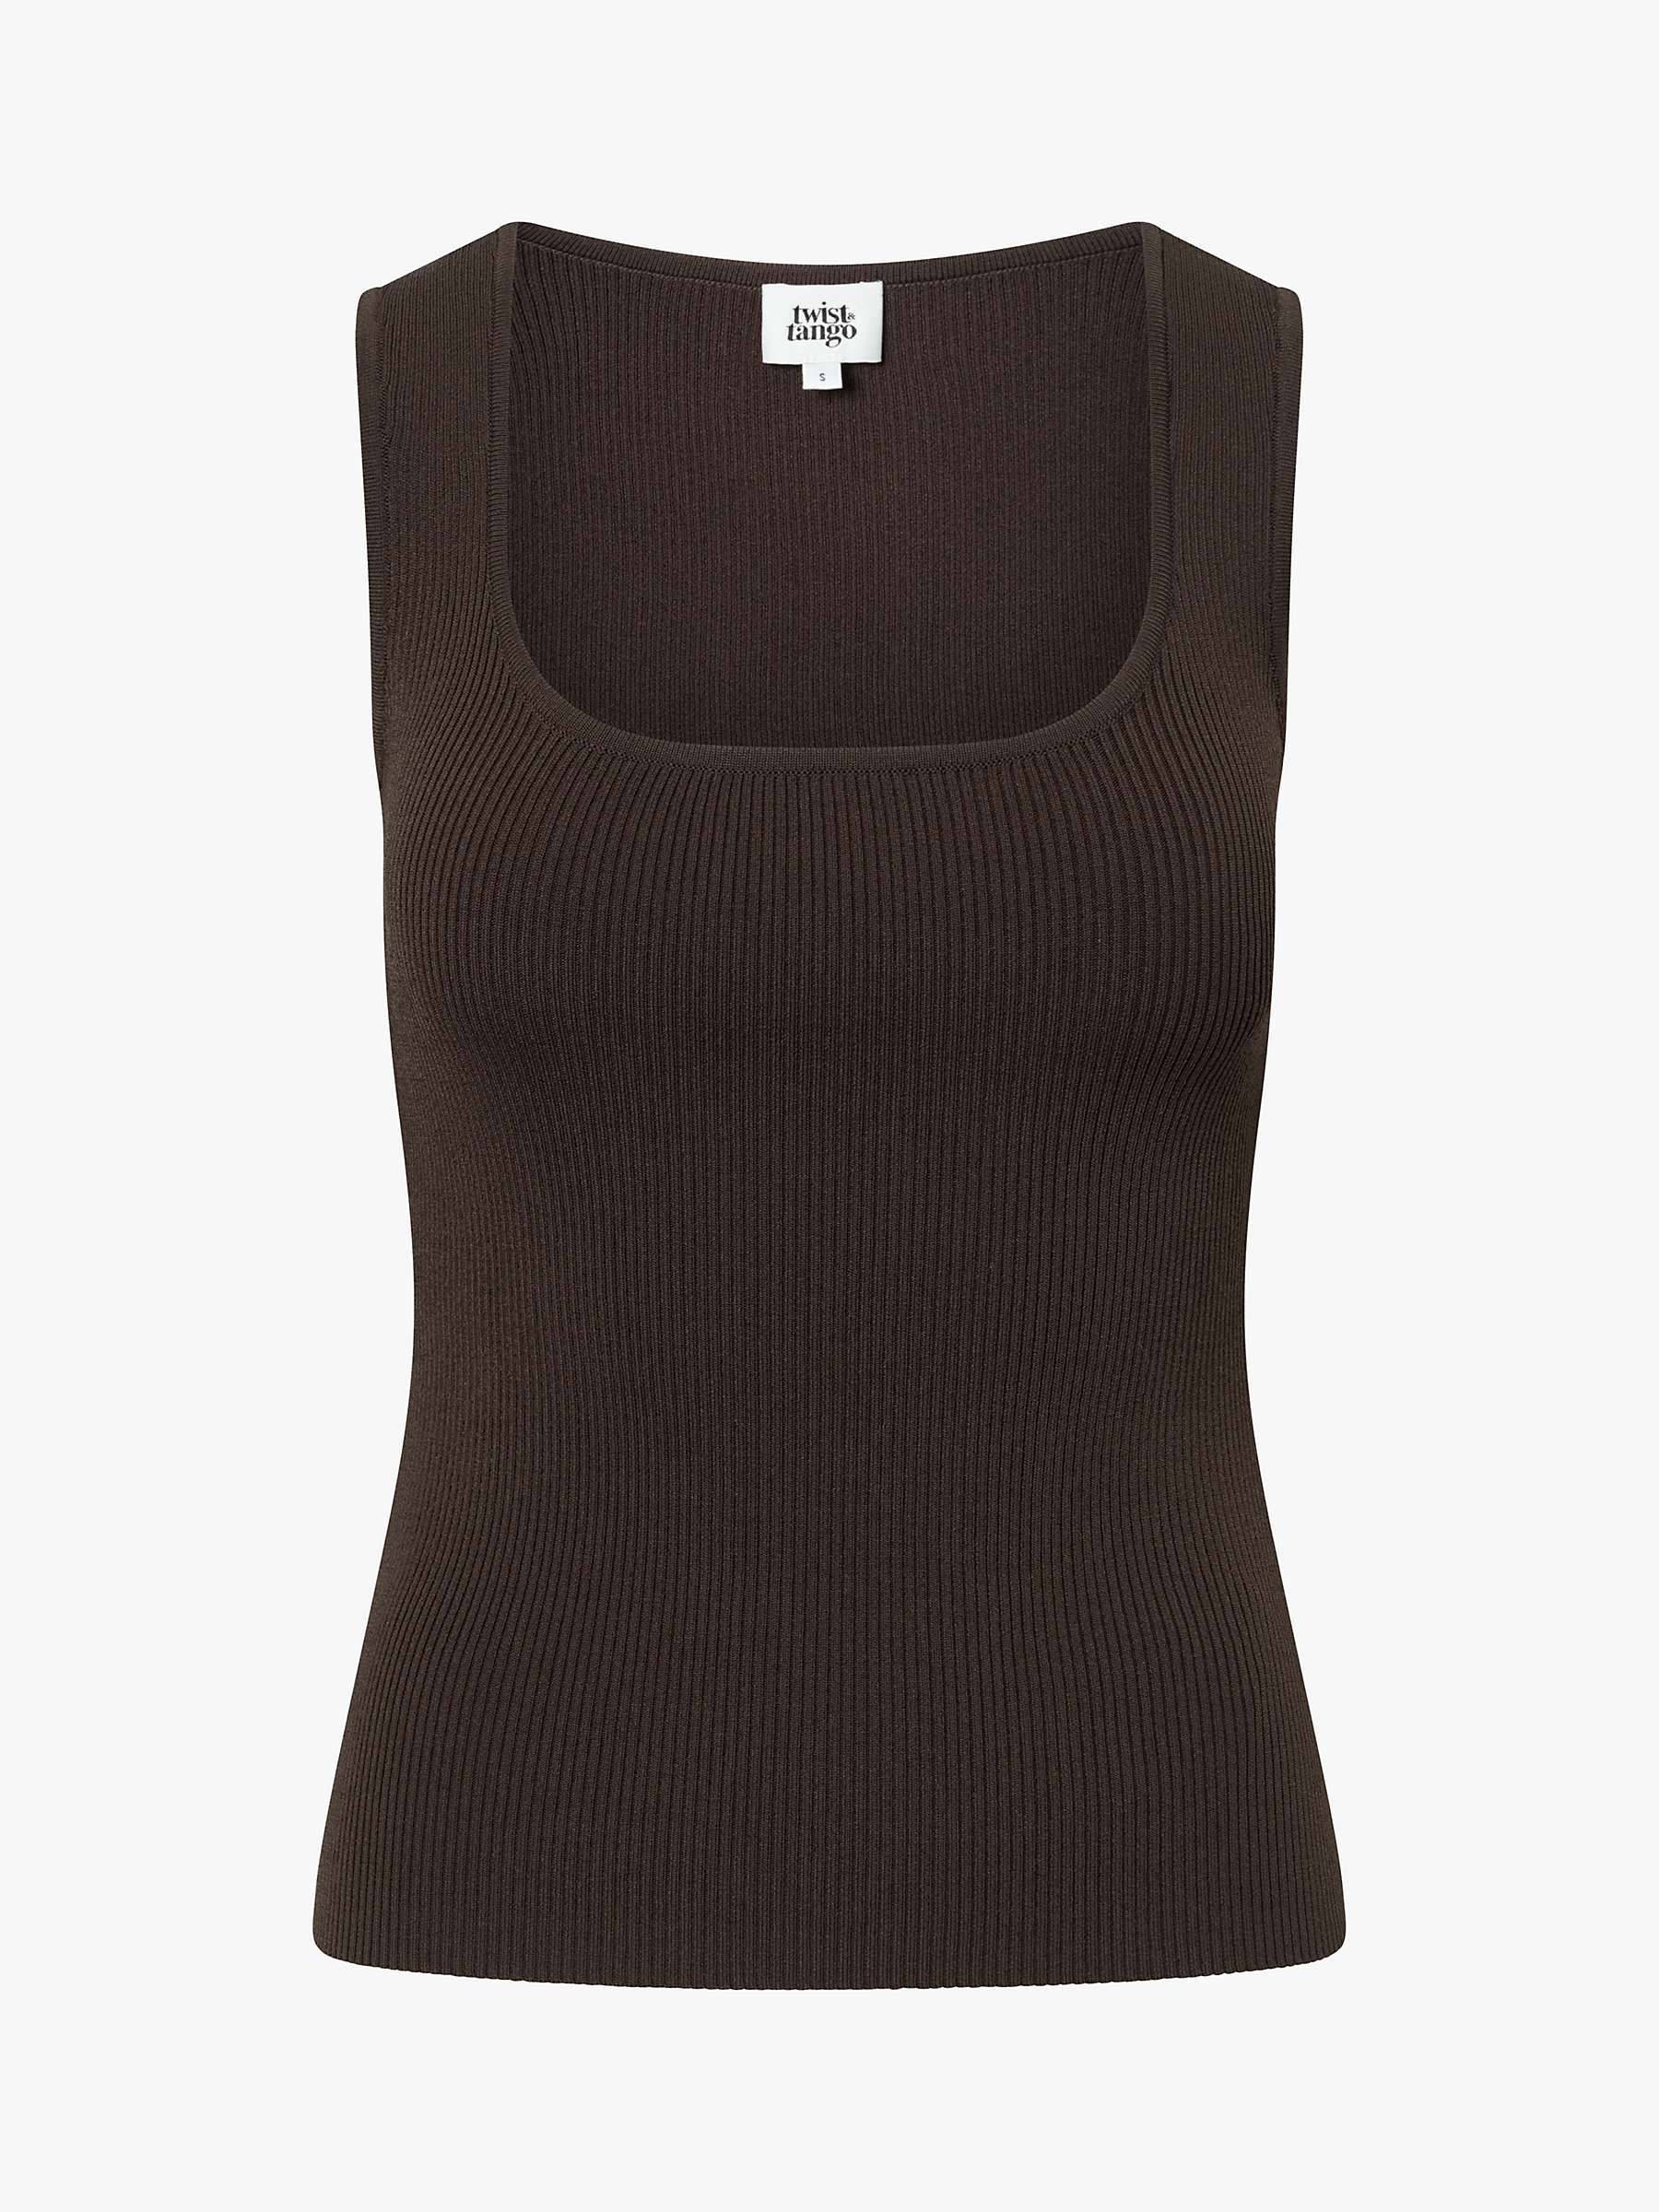 Buy Twist & Tango Lilly Stretchy Tank Top, Dark Brown Online at johnlewis.com